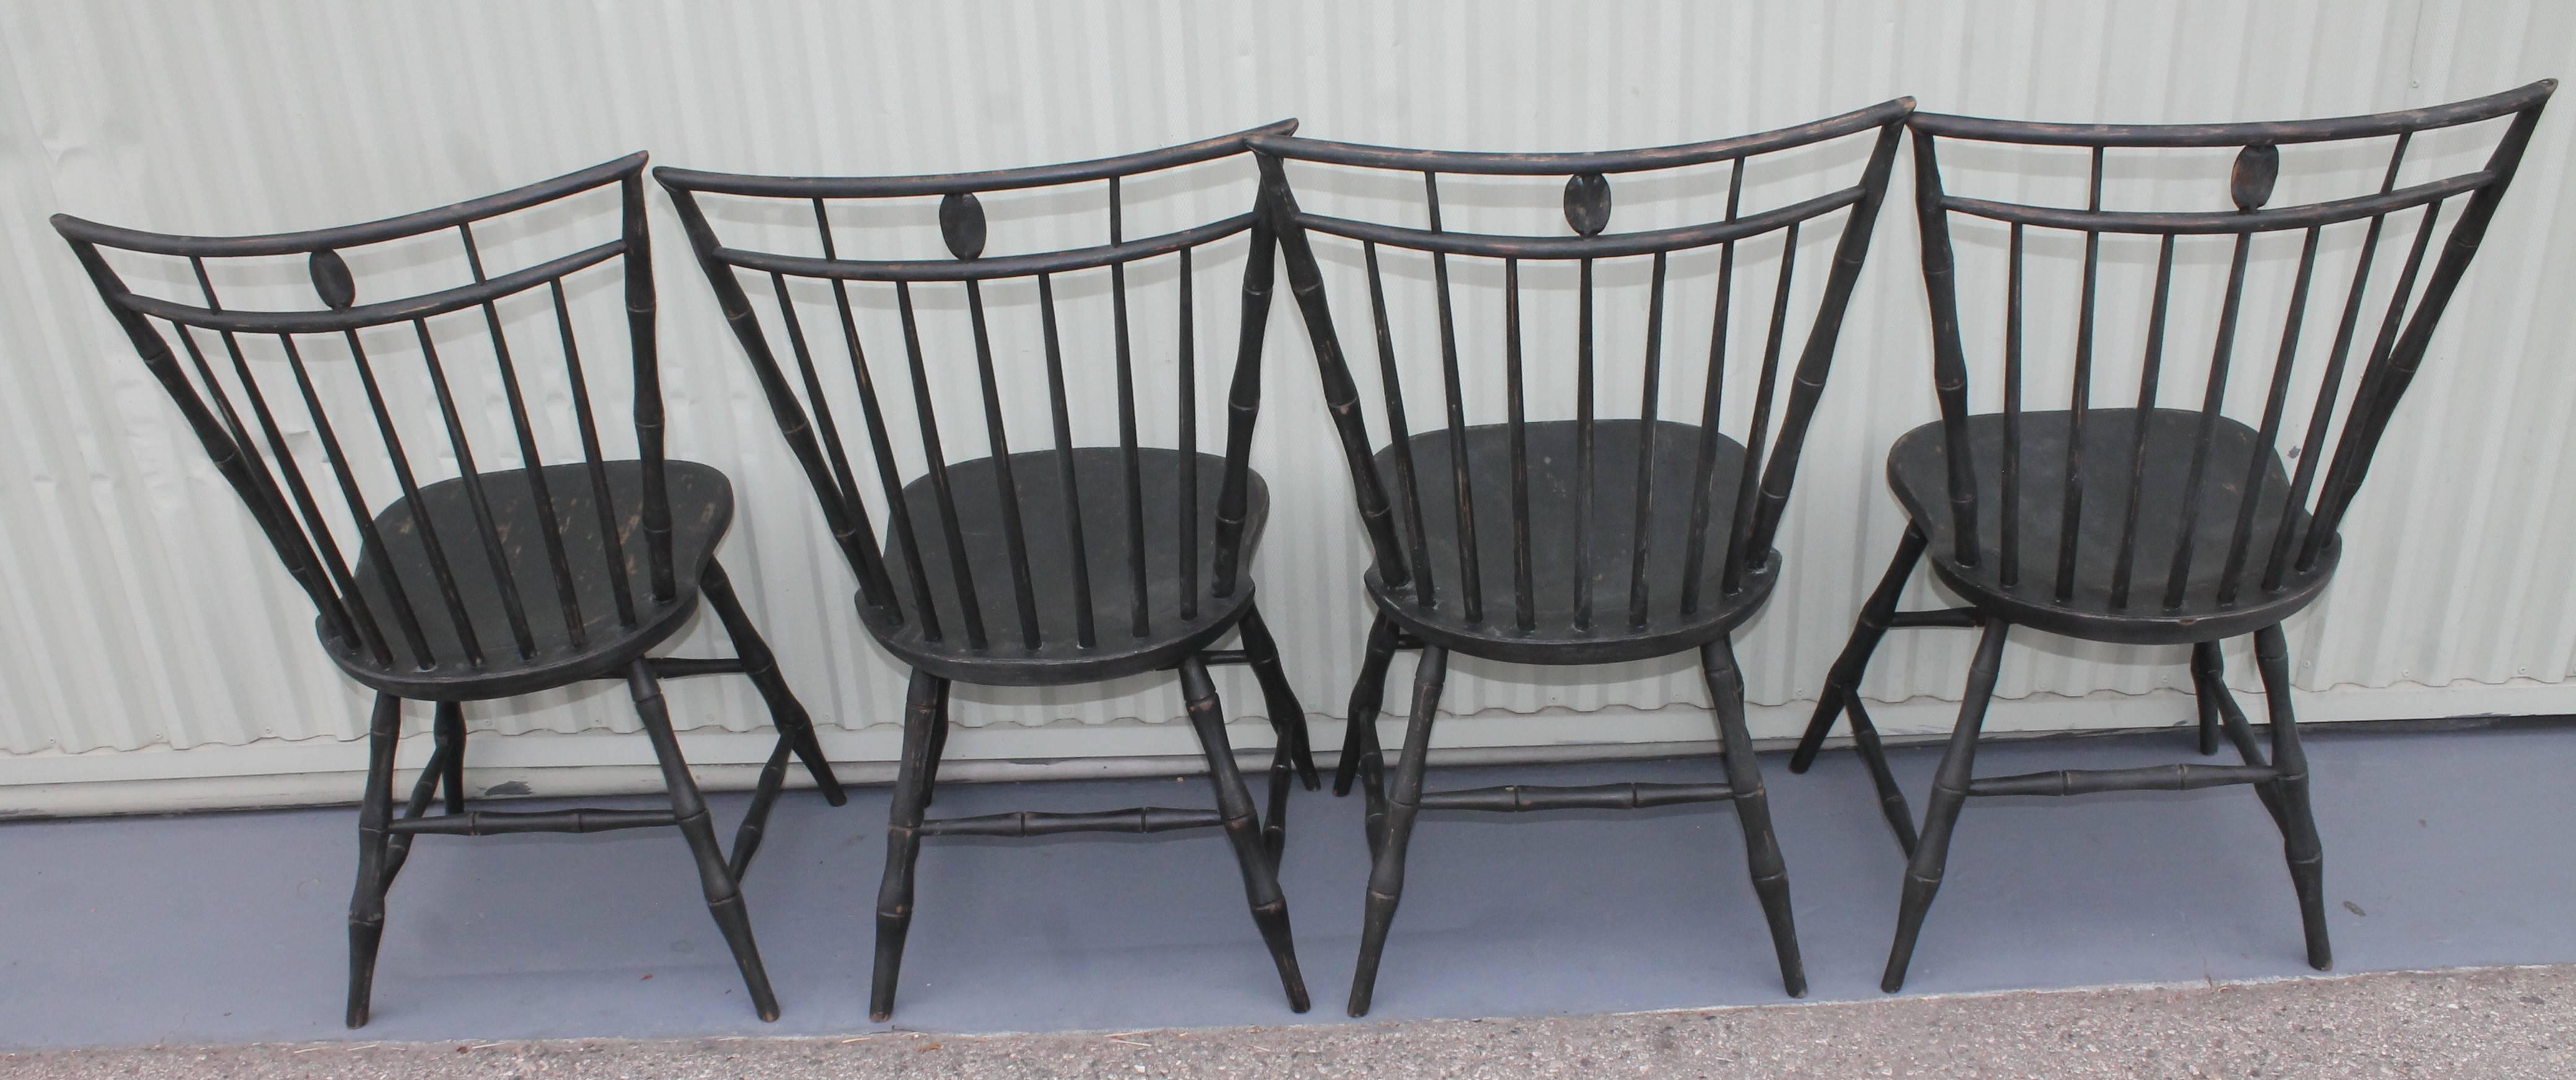 Hand-Painted 19th Century Birdcage Windsor Chairs in Windsor Green, Set of Four